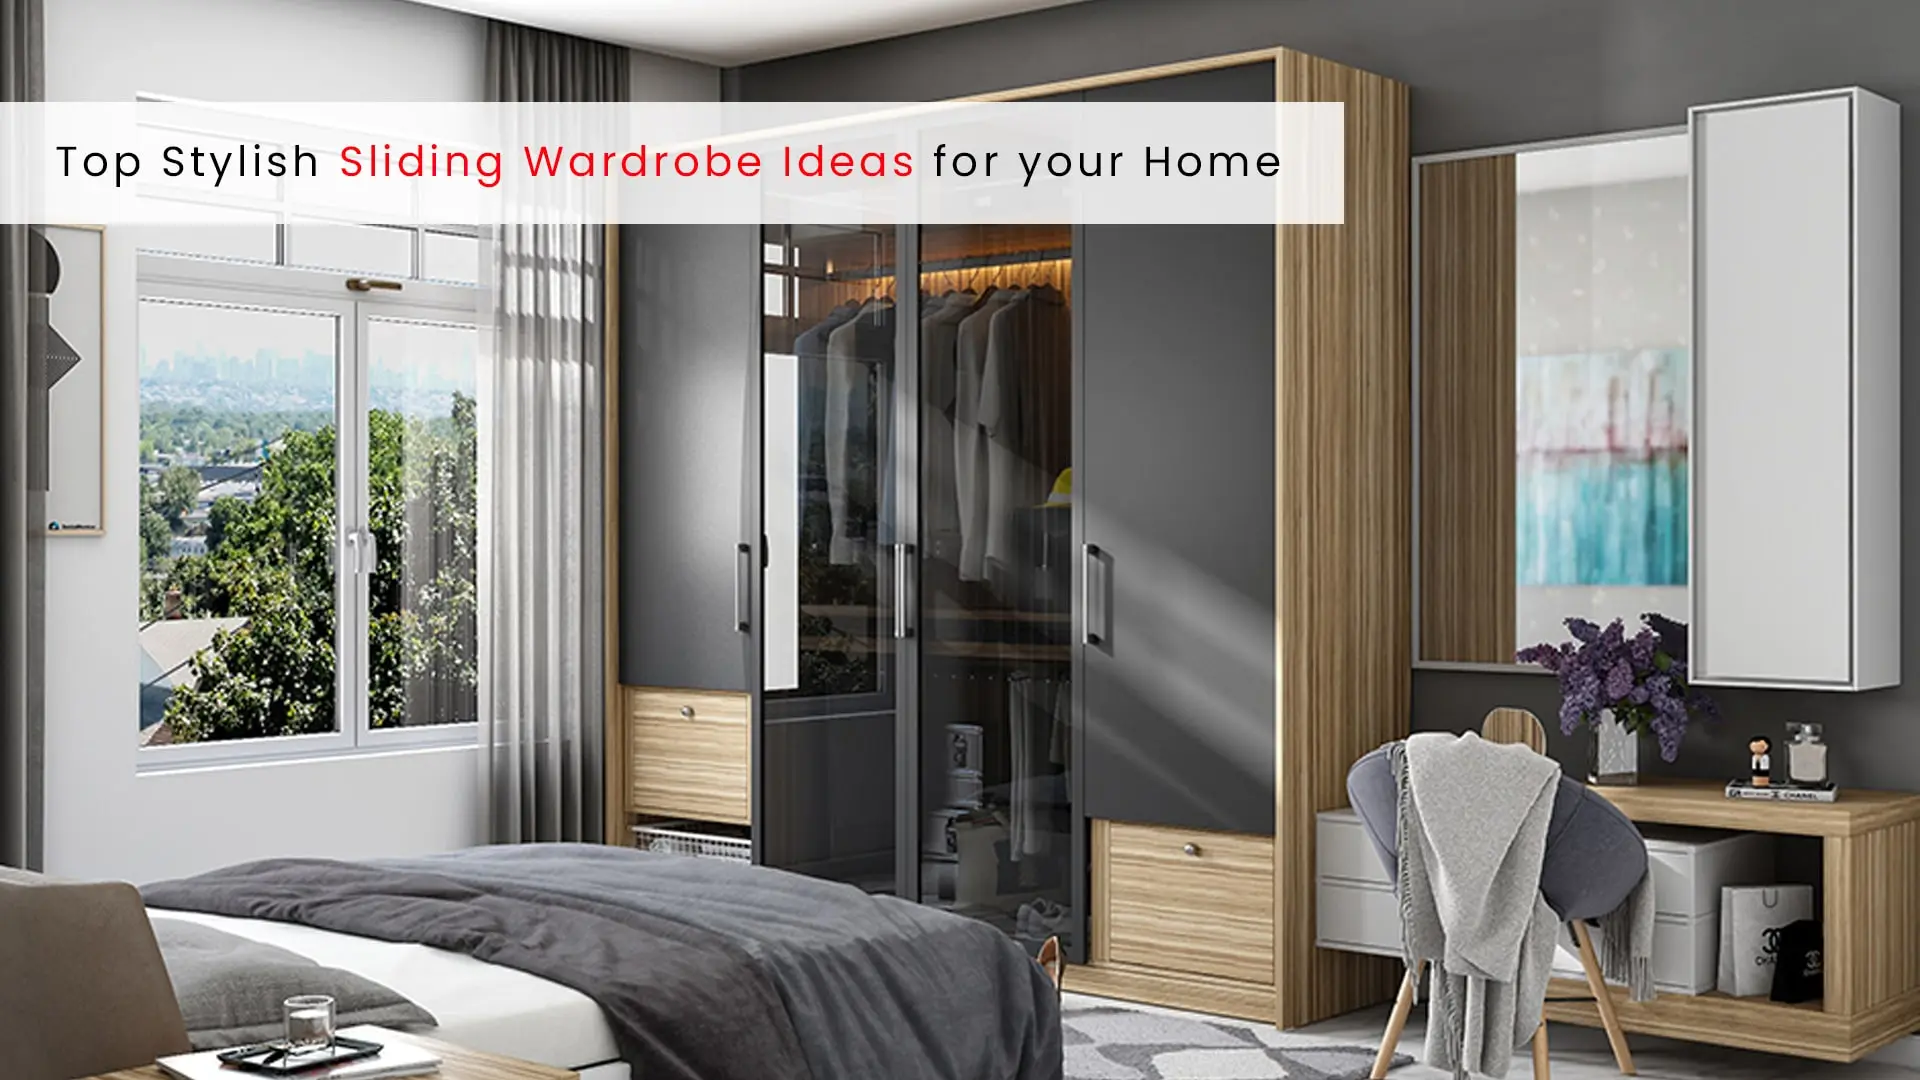 Top stylish sliding wardrobe ideas for your home